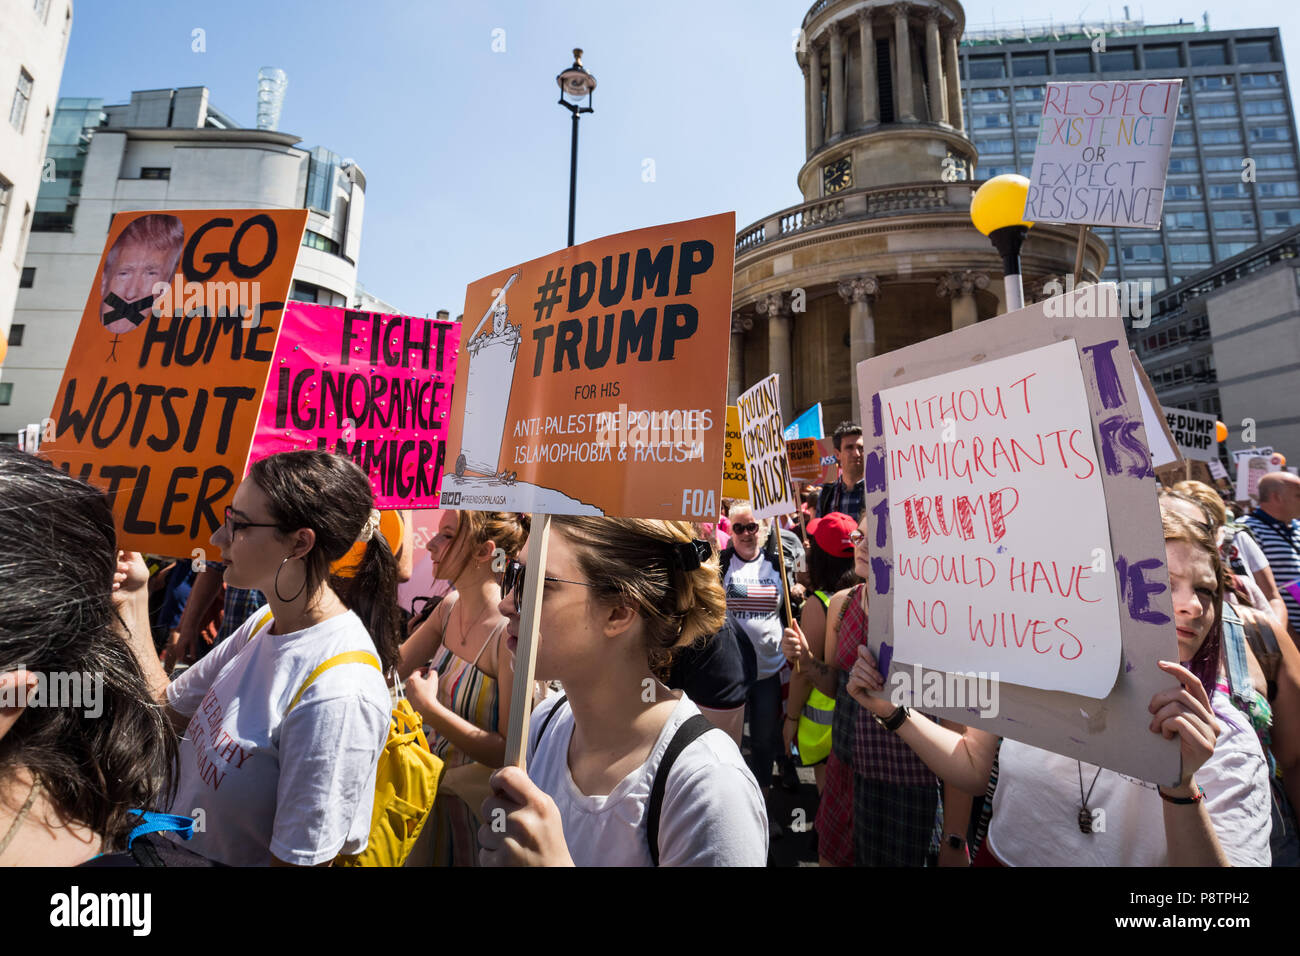 London, UK. 13th July, 2018. Anti-Trump demonstration draws thousands of protesters to the city on the day US president Donald Trump begins his UK visit. Credit: Guy Corbishley/Alamy Live News Stock Photo